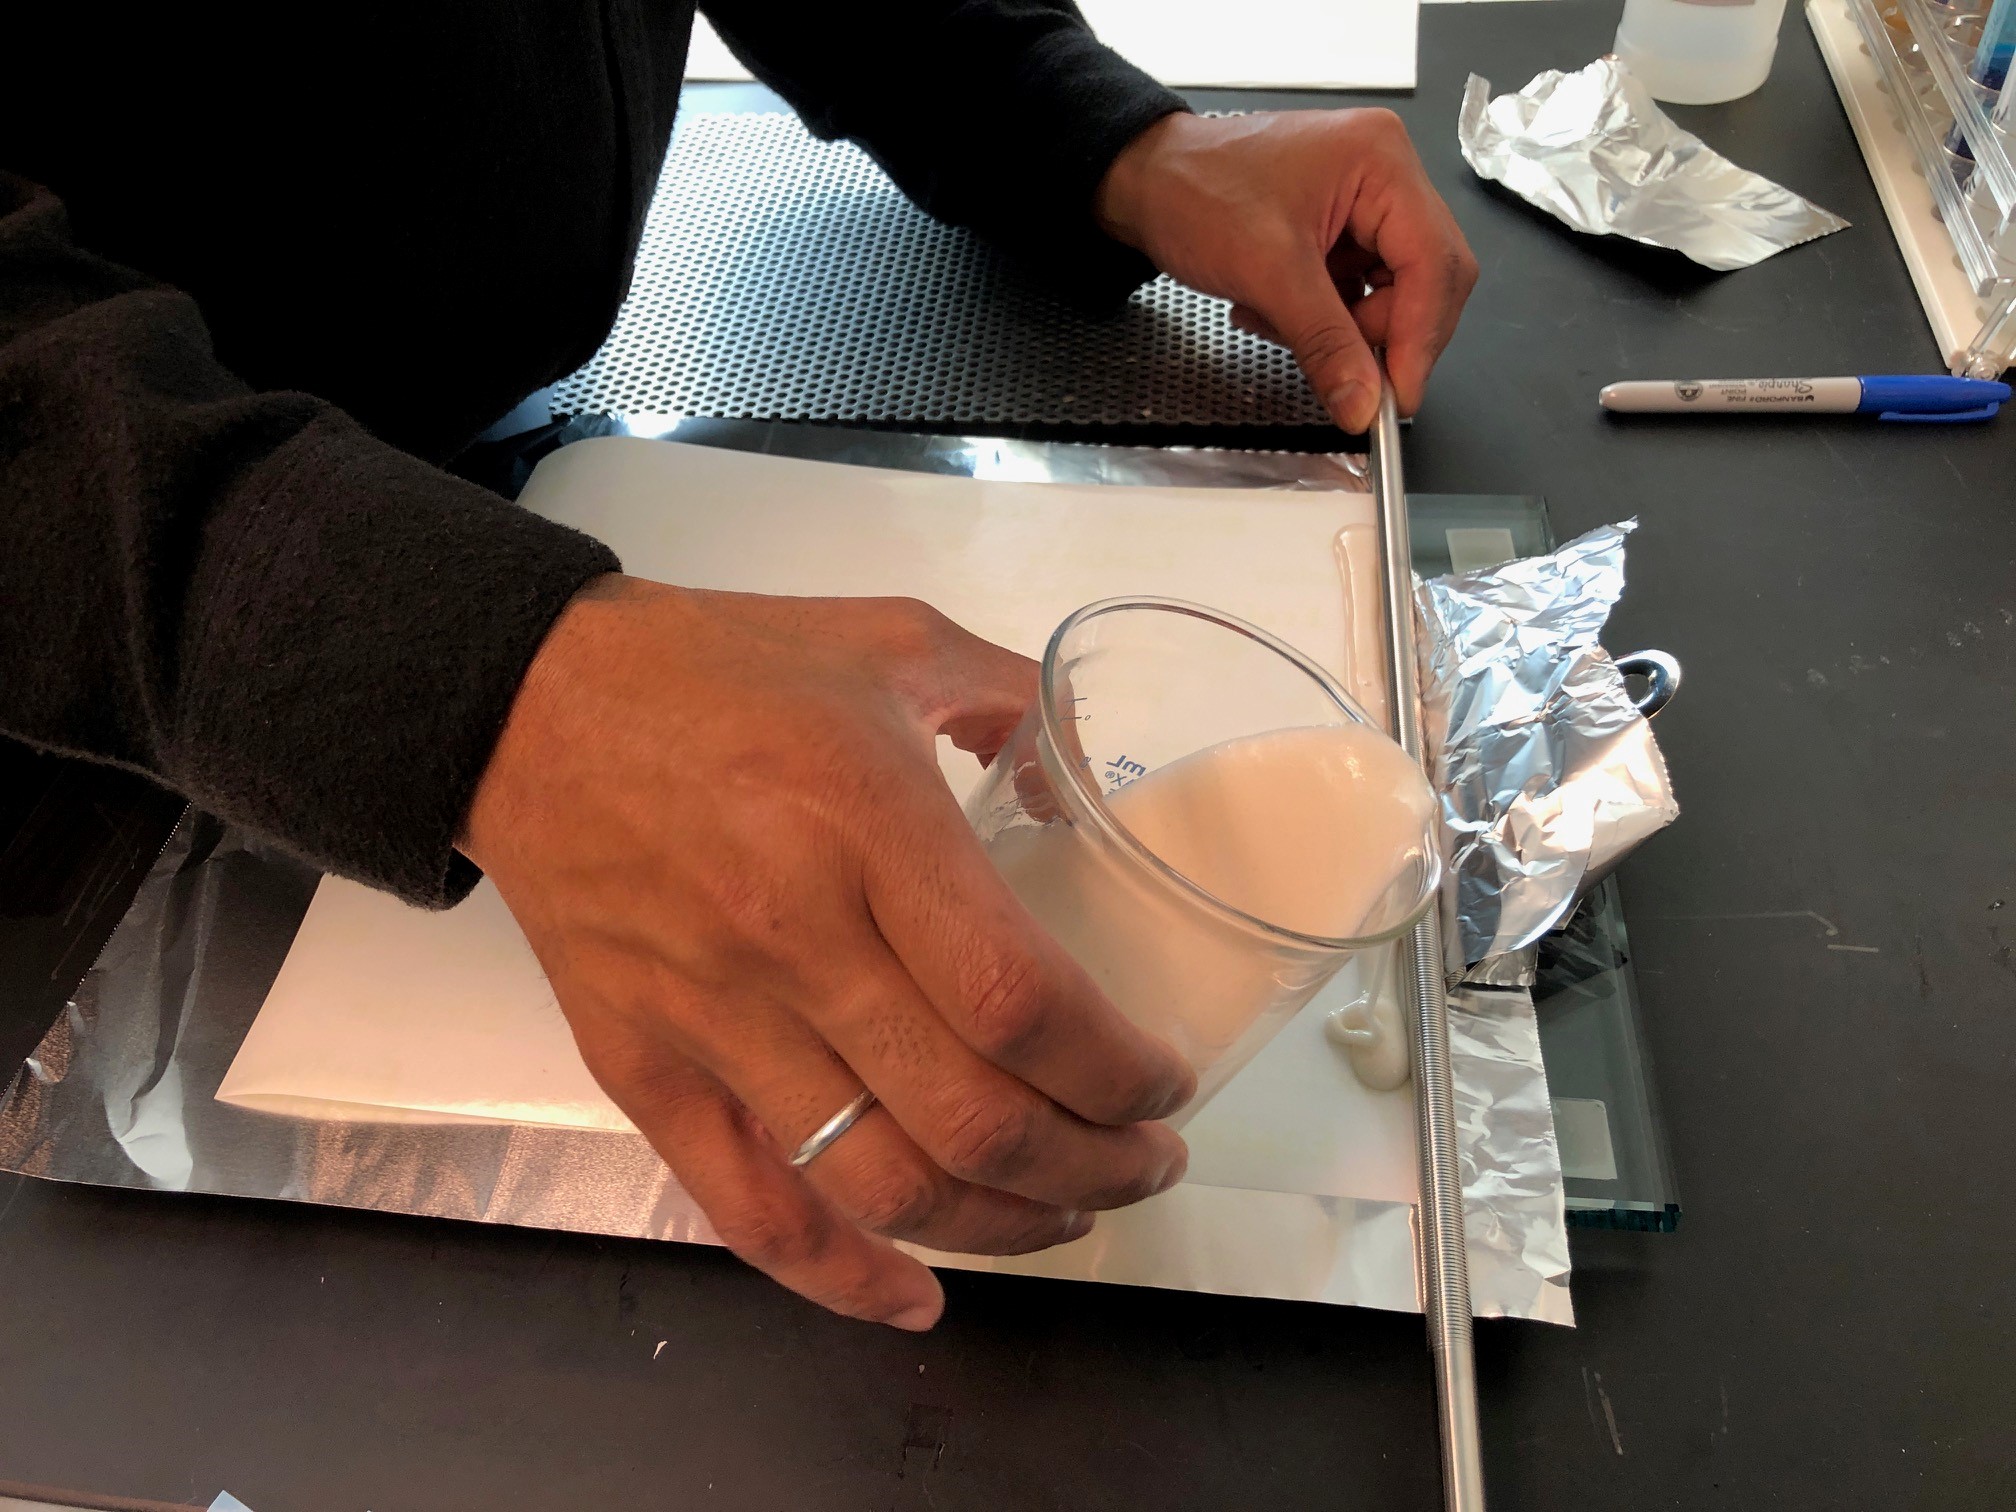 A scientist pours an experimental adhesive compound during the research process